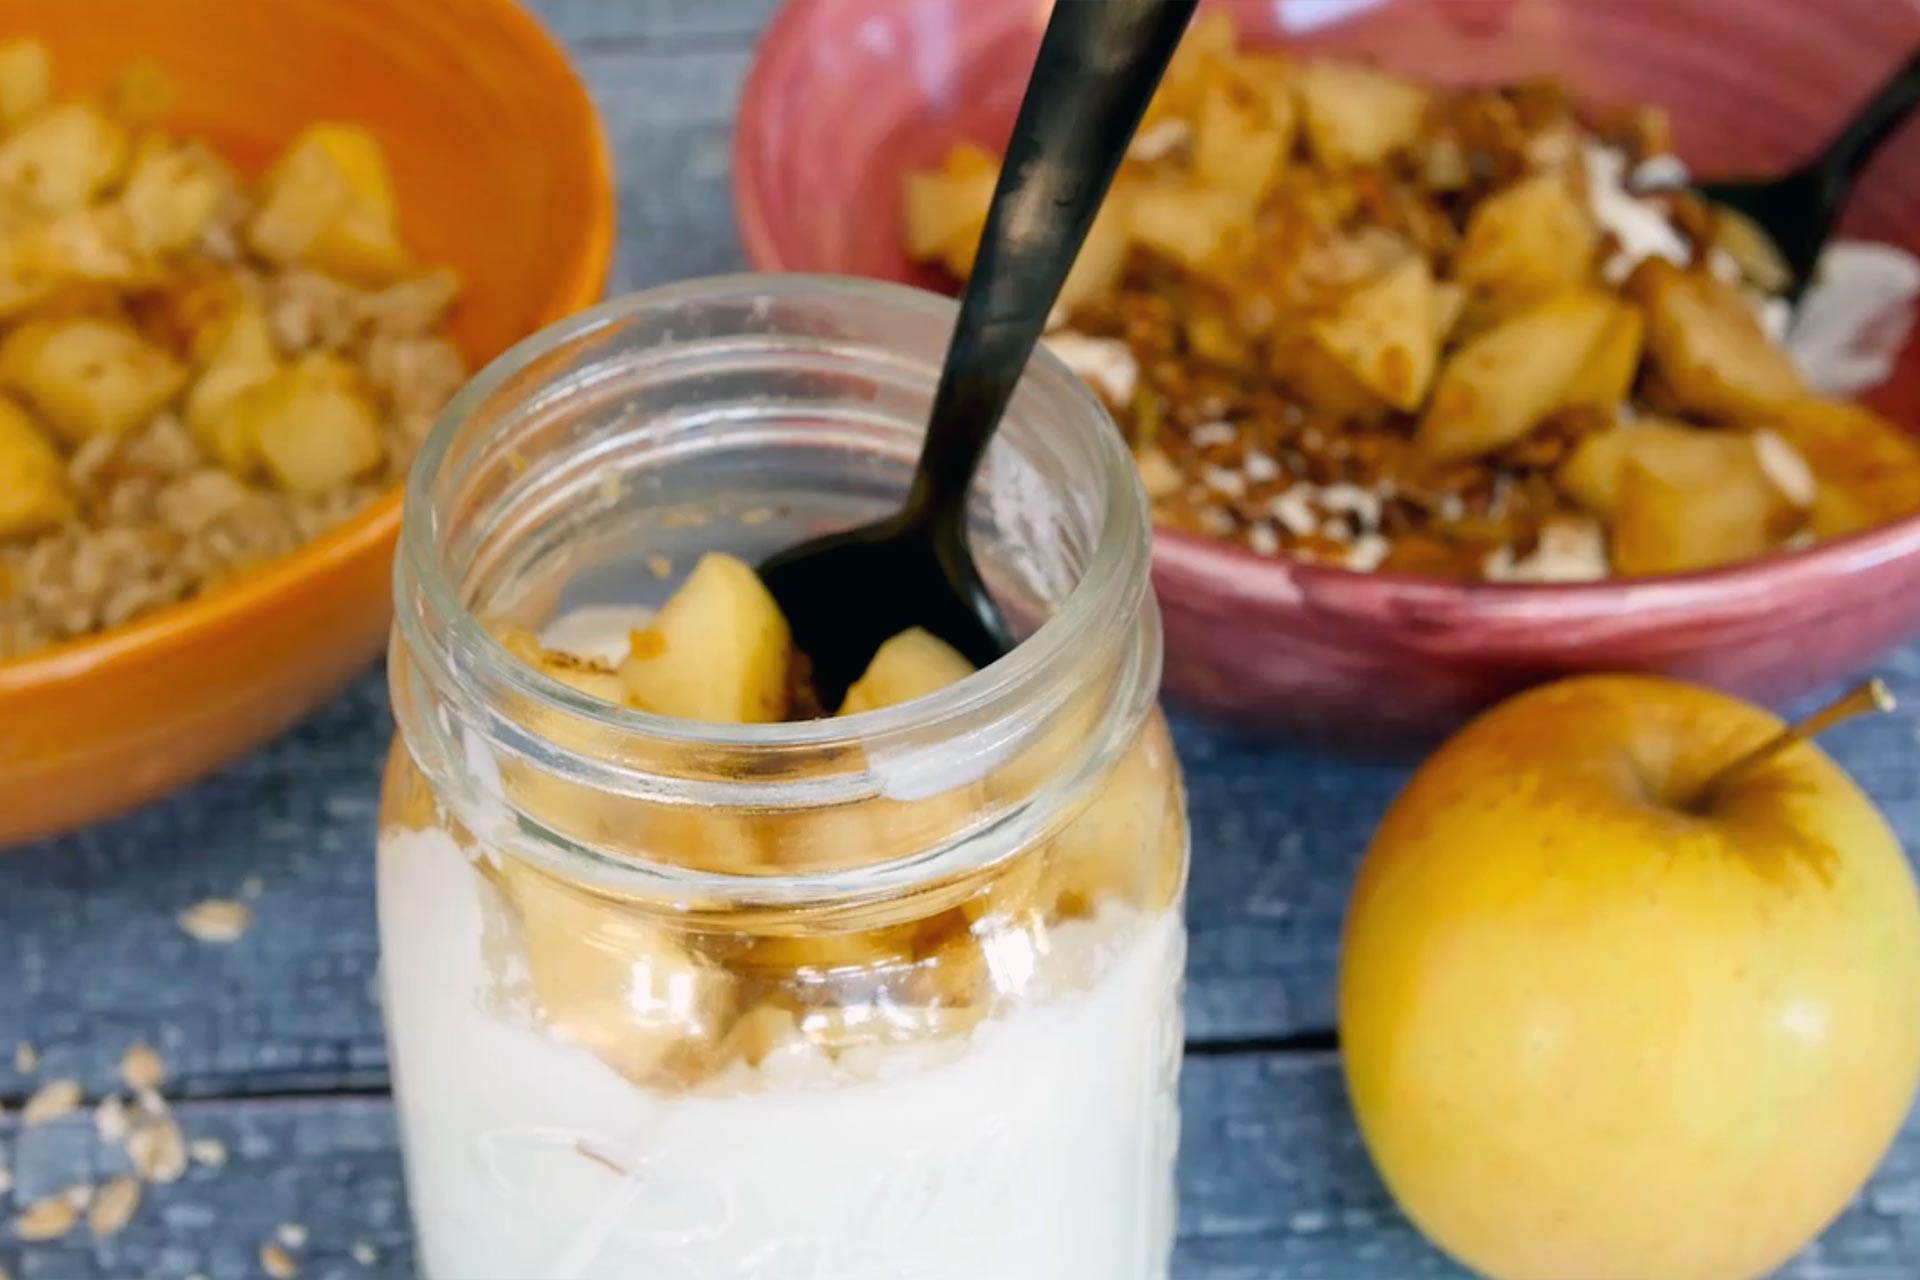 Along with baked apples, we also have three great ideas for incorporating them into a Baked Apple Oatmeal, Baked Apple Overnight Oats, and a Baked Apple Parfait.